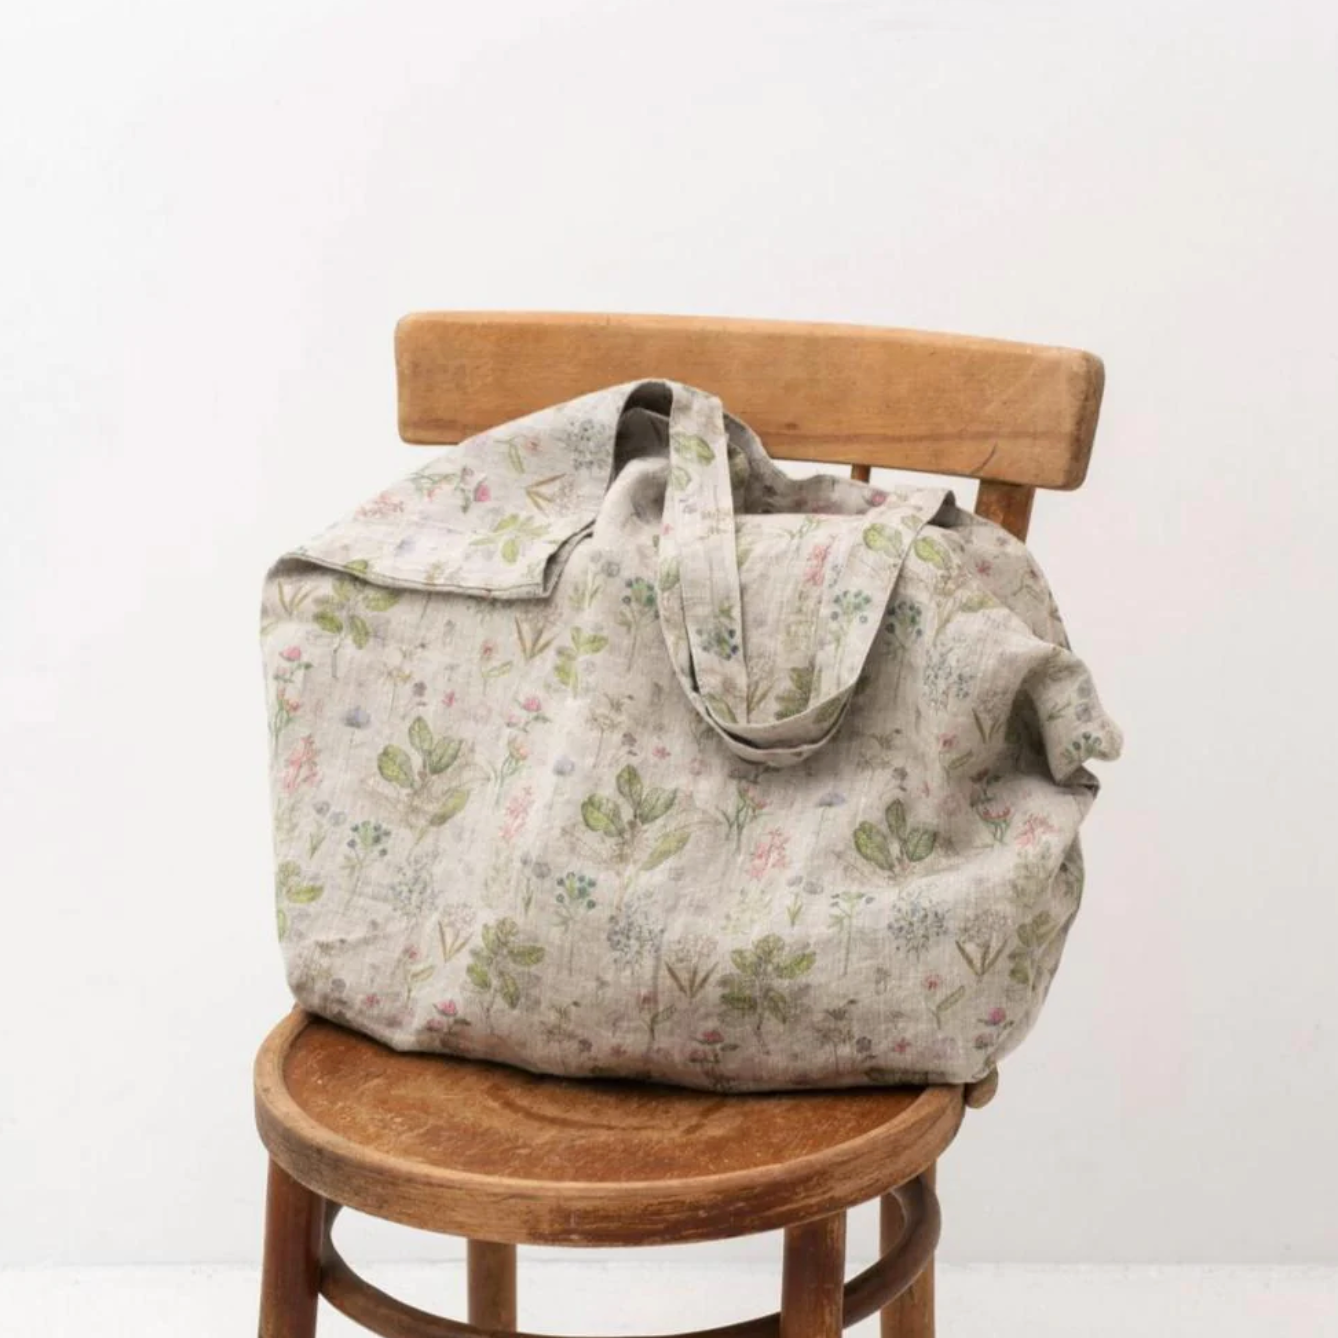 A Linen Tales Floral Linen Bag with pastel and green floral/leaf designs, sitting on a wooden chair,